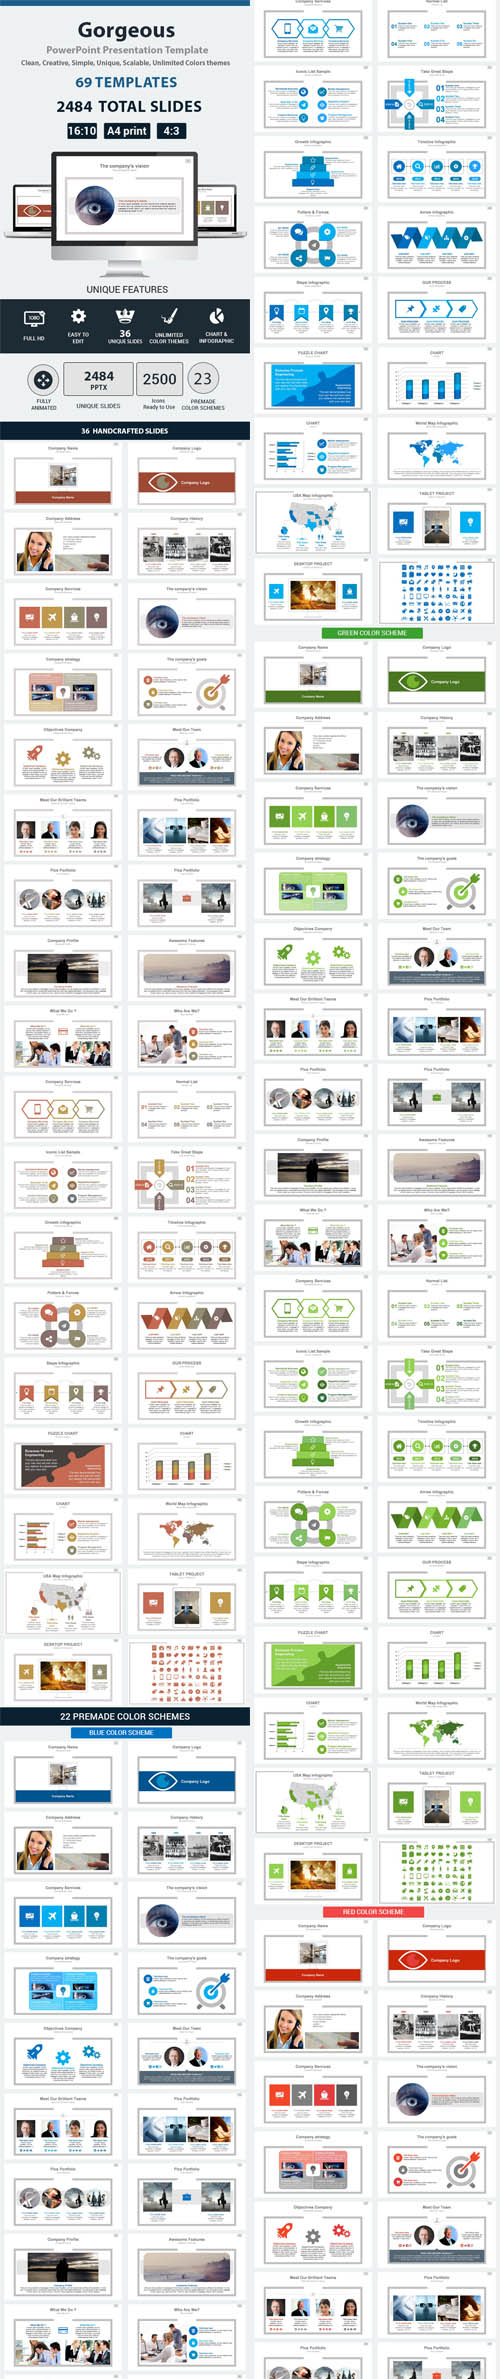 GraphicRiver - Gorgeous PowerPoint Presentation Template 12719873